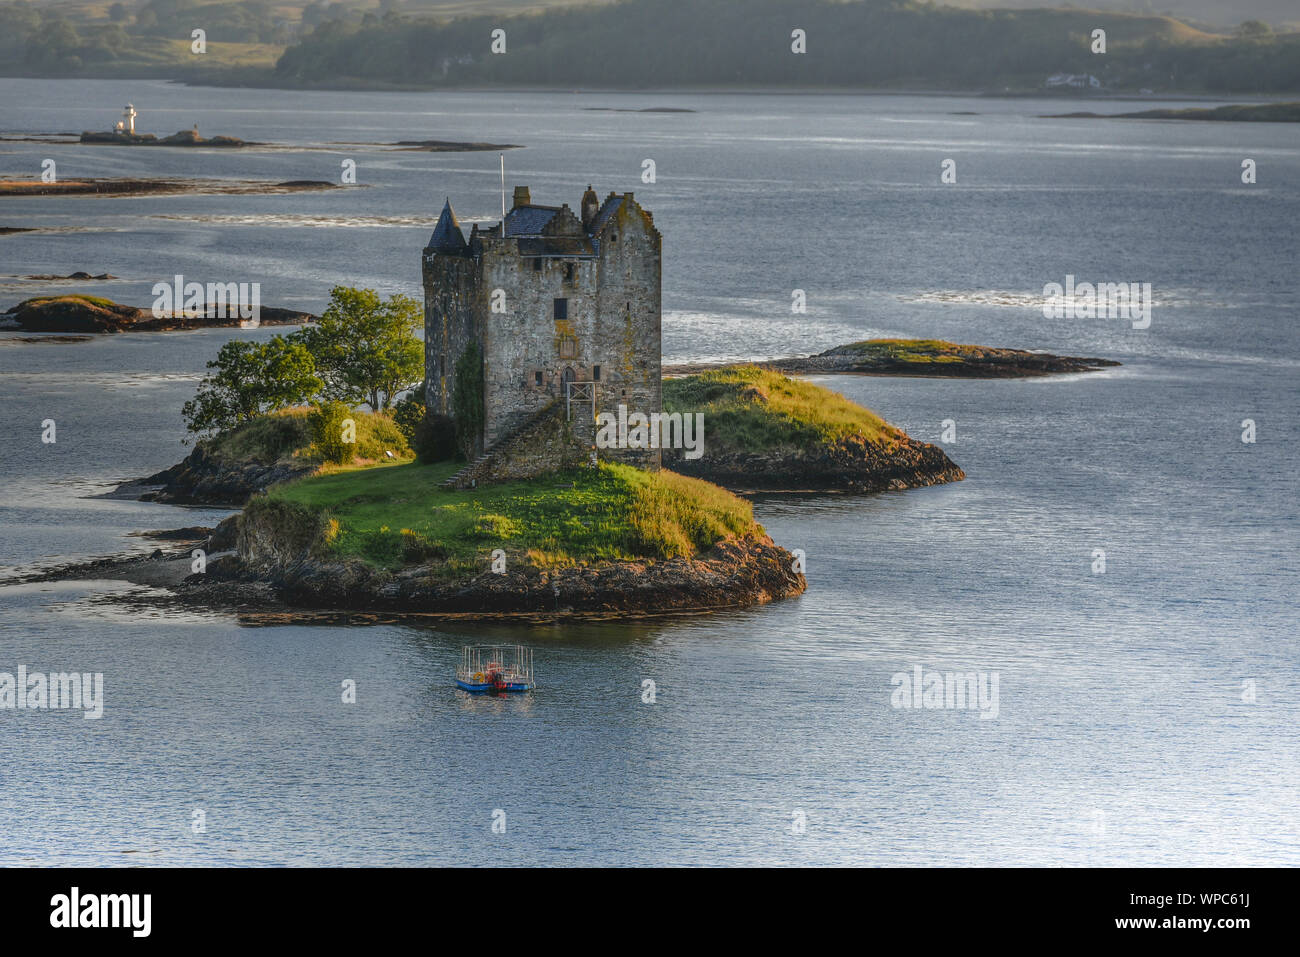 Tower on island in lake in north-west Scotland Stock Photo